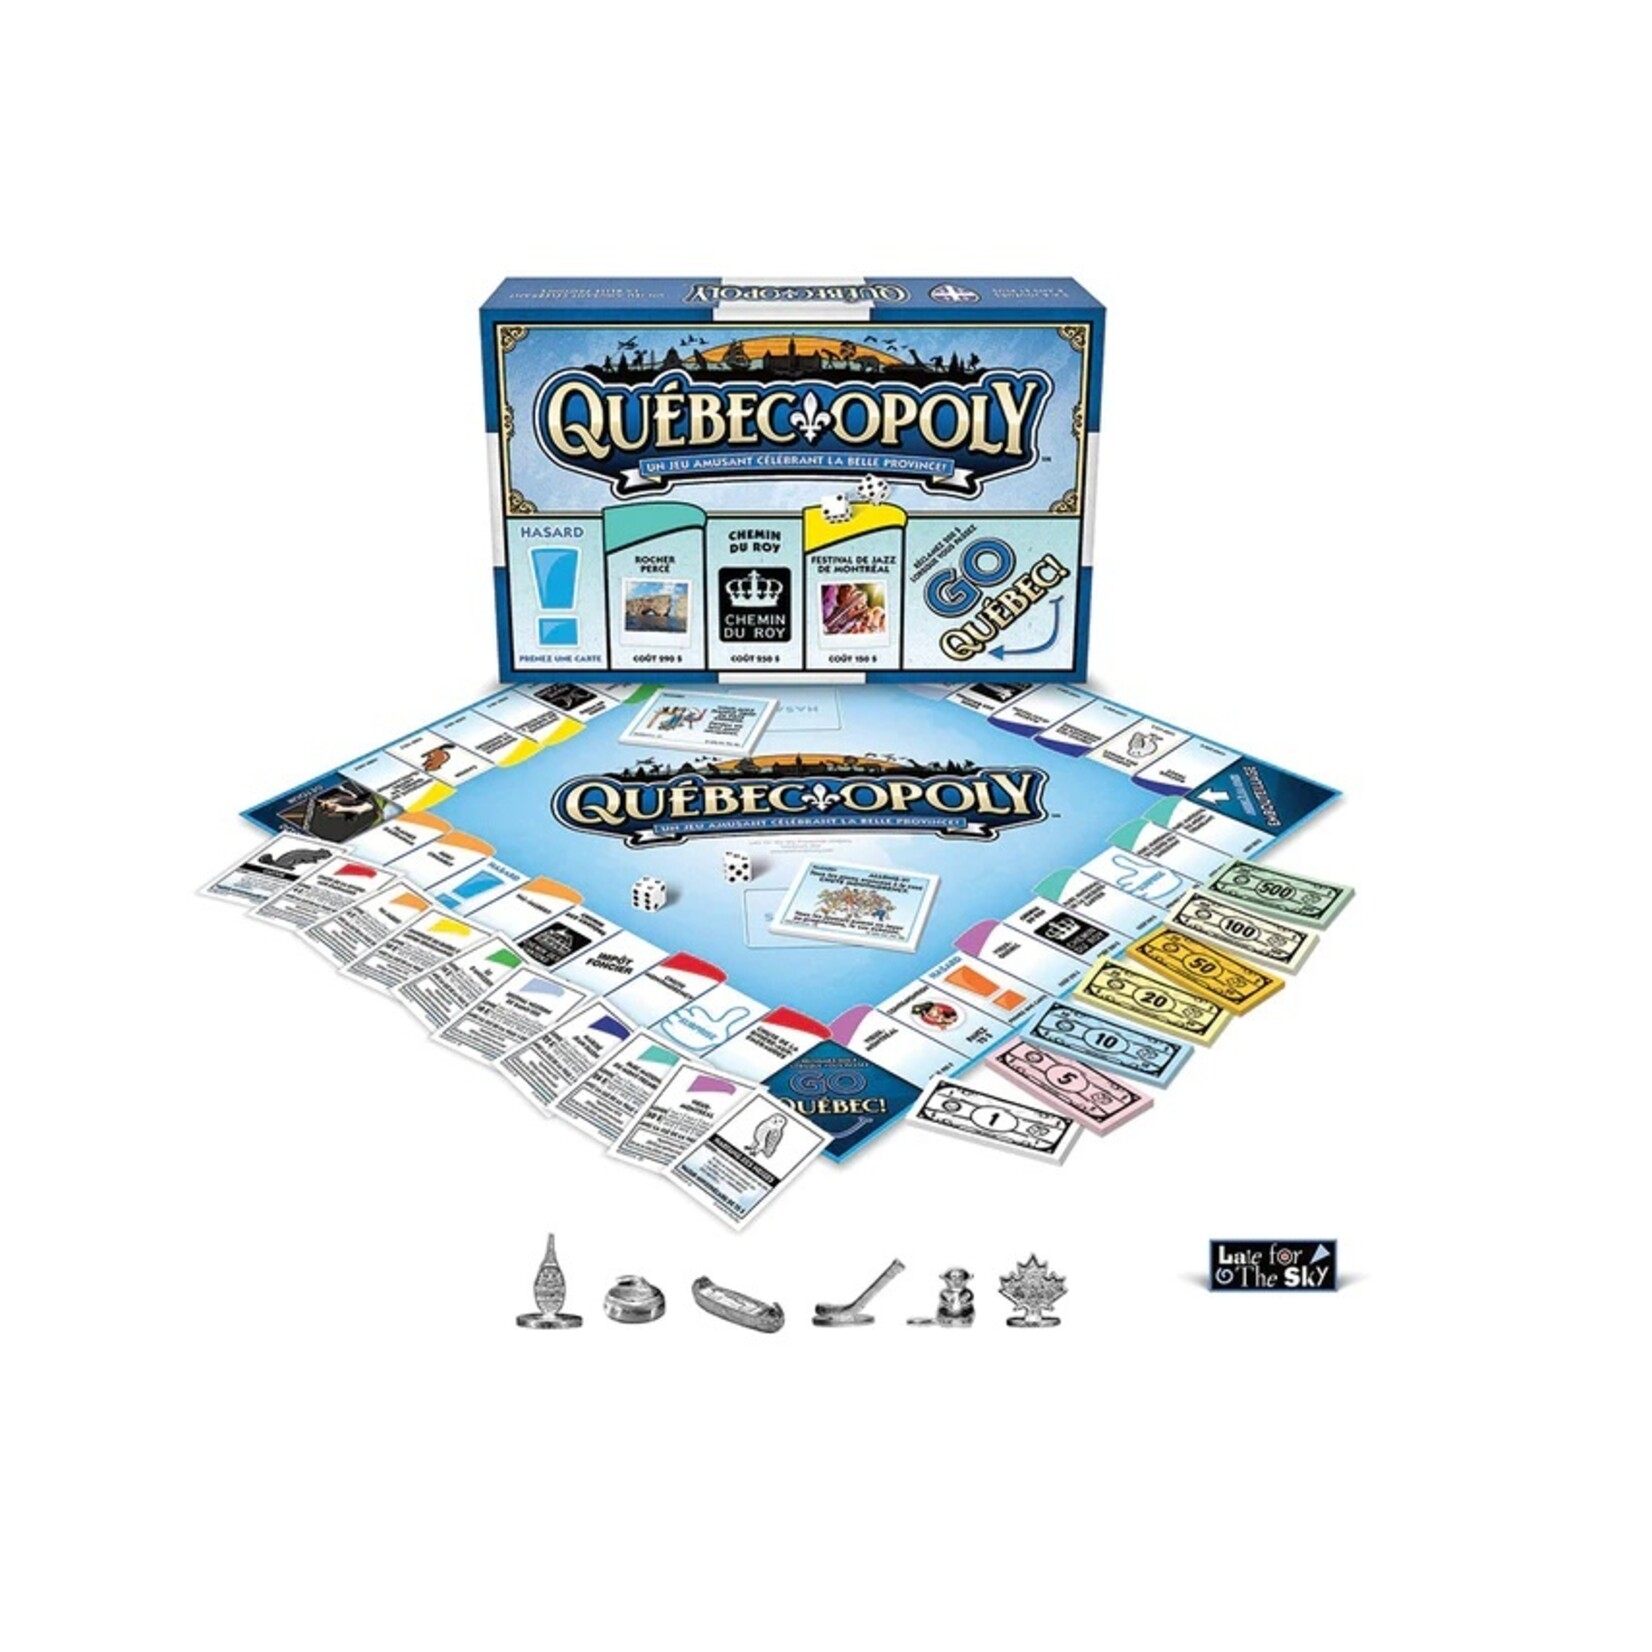 Outset Quebec-Opoly FR